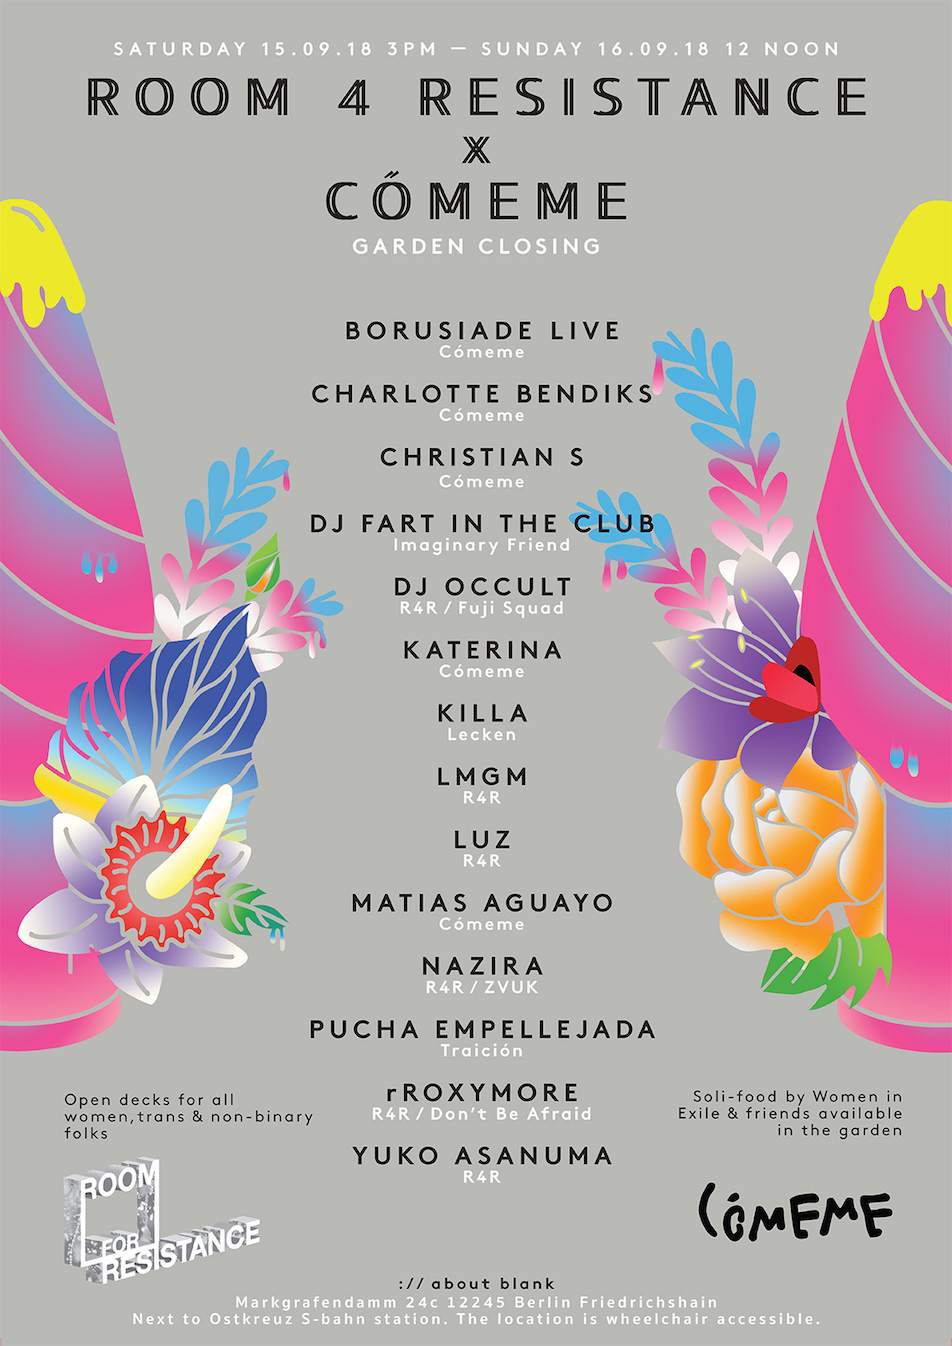 Room 4 Resistance teams up with Cómeme for 21-hour party at ://about blank image